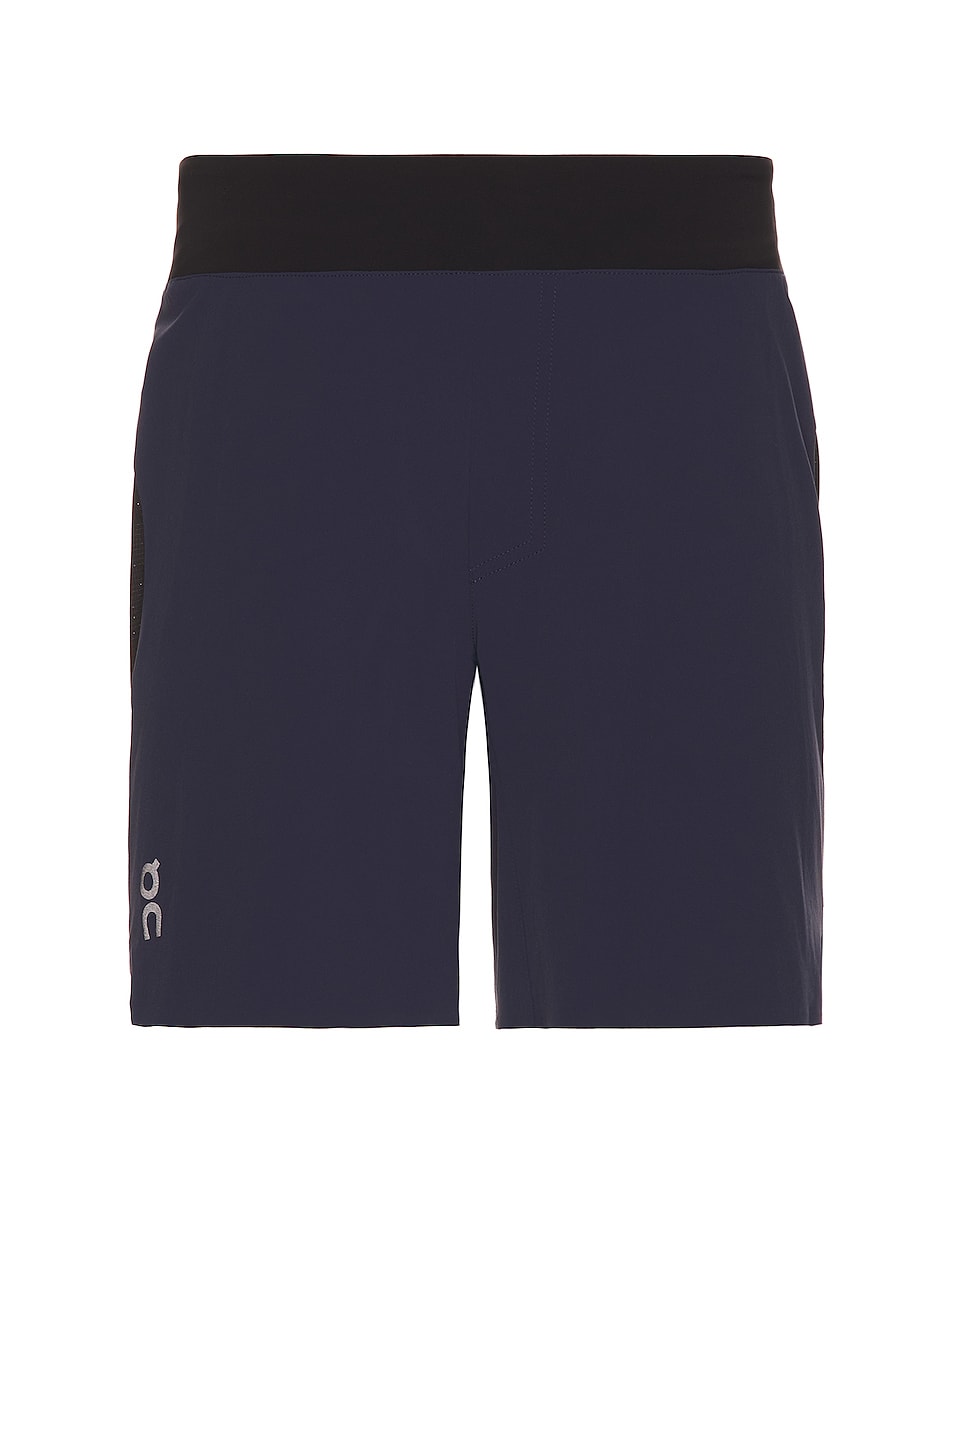 Image 1 of On Lightweight Shorts in Navy & Black